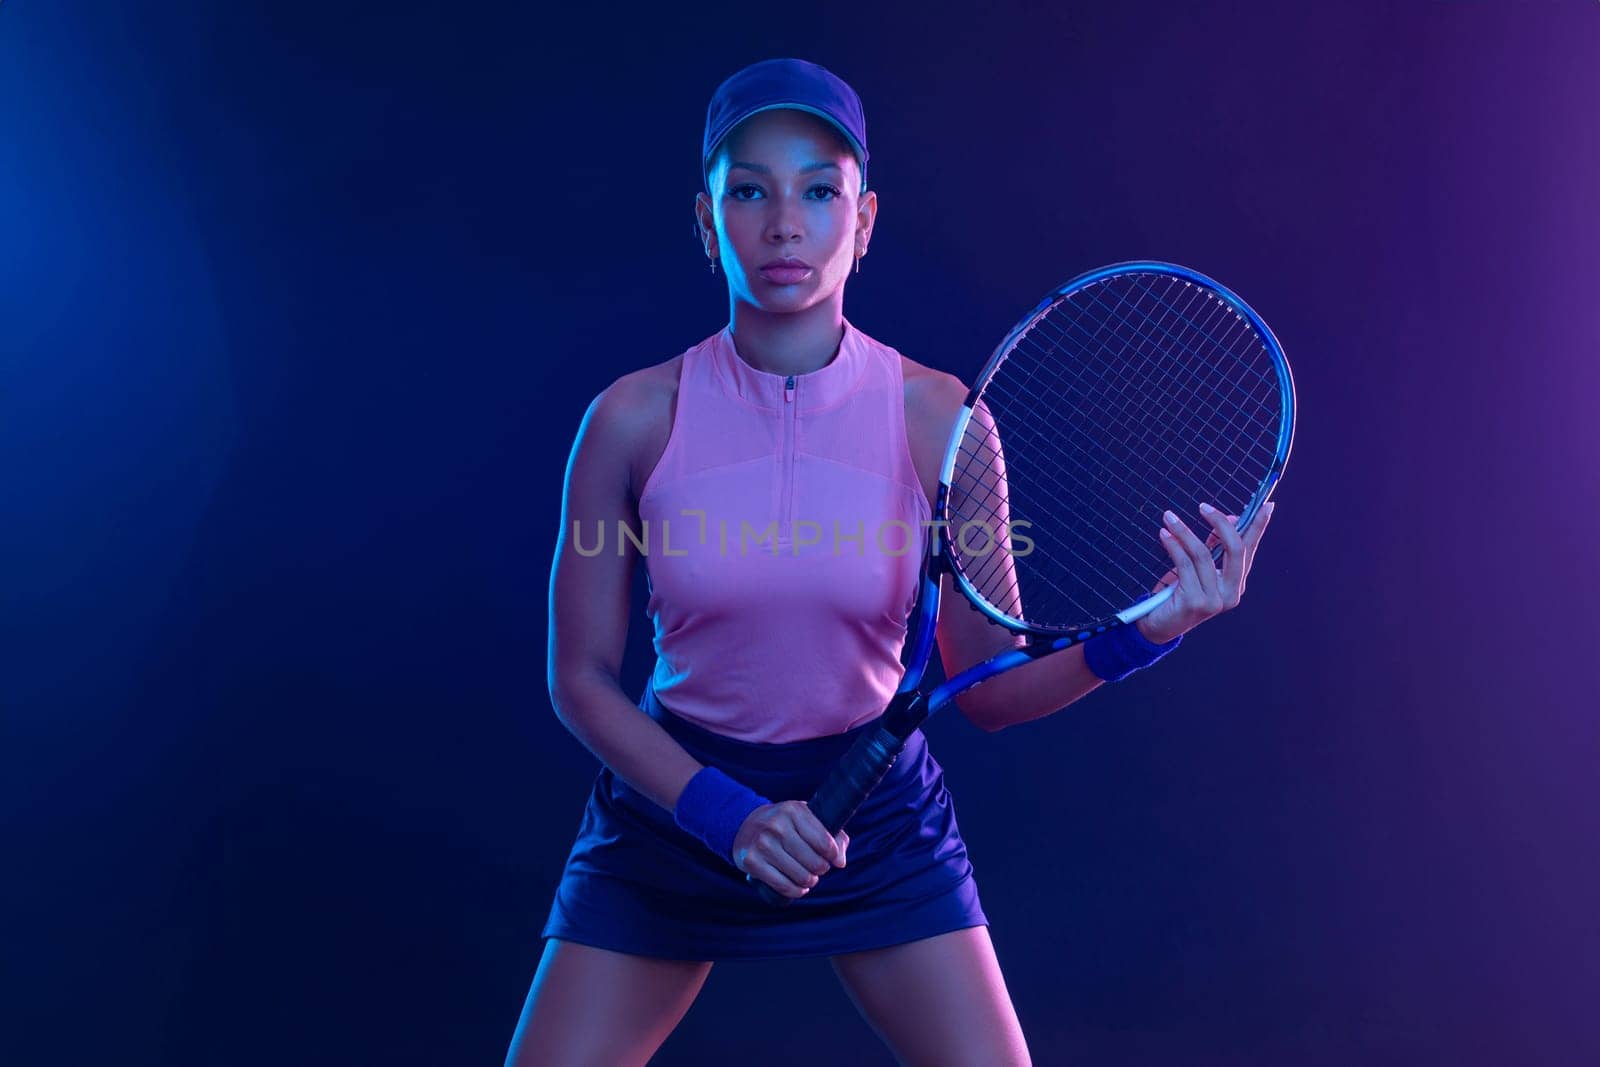 Tennis player woman with racket on tournament. Girl athlete with tenis racket on court with neon colors. Sport concept. Download a high quality photo for design of a sports app or tour events. by MikeOrlov